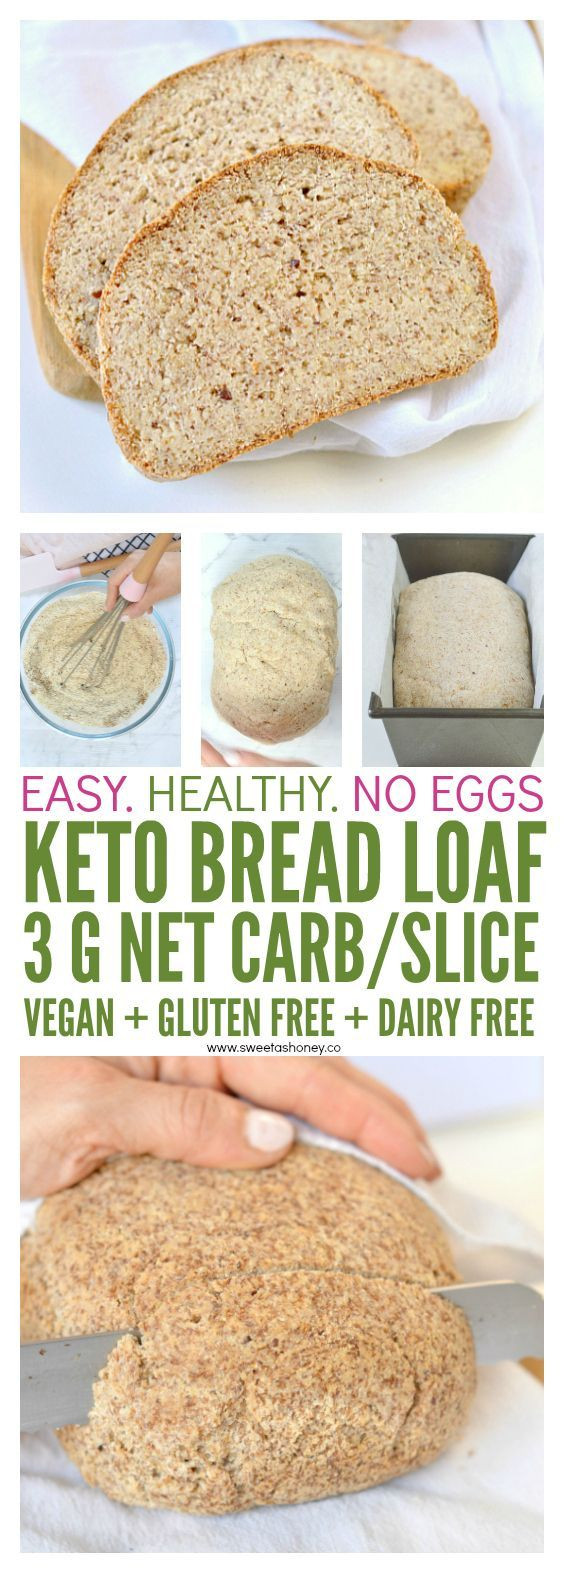 Keto Bread Coconut Flour No Eggs
 THE BEST KETO BREAD LOAF NO EGGS Low Carb with coconut